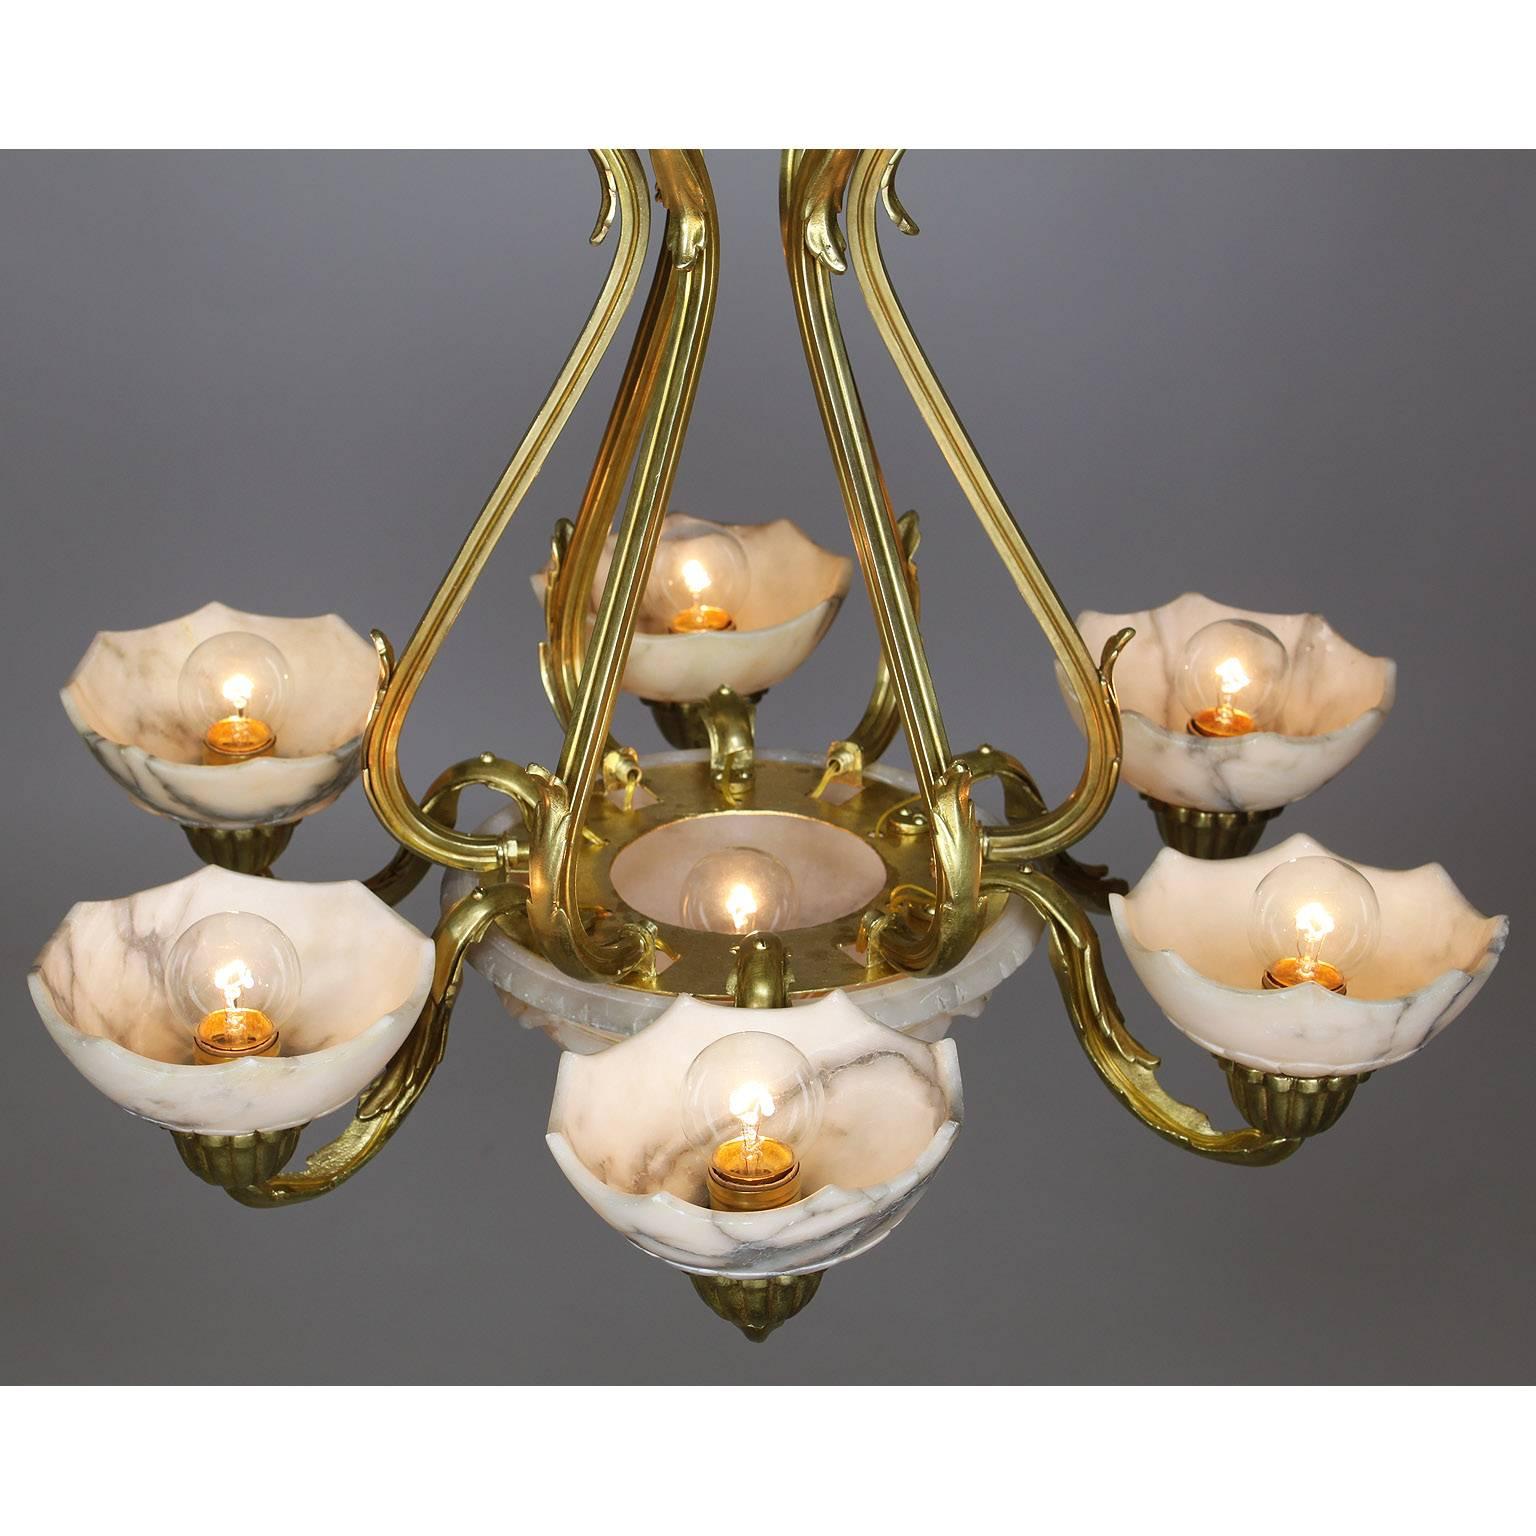 20th Century French Art Deco Gilt Bronze and Carved Alabaster Seven-Light Chandelier For Sale